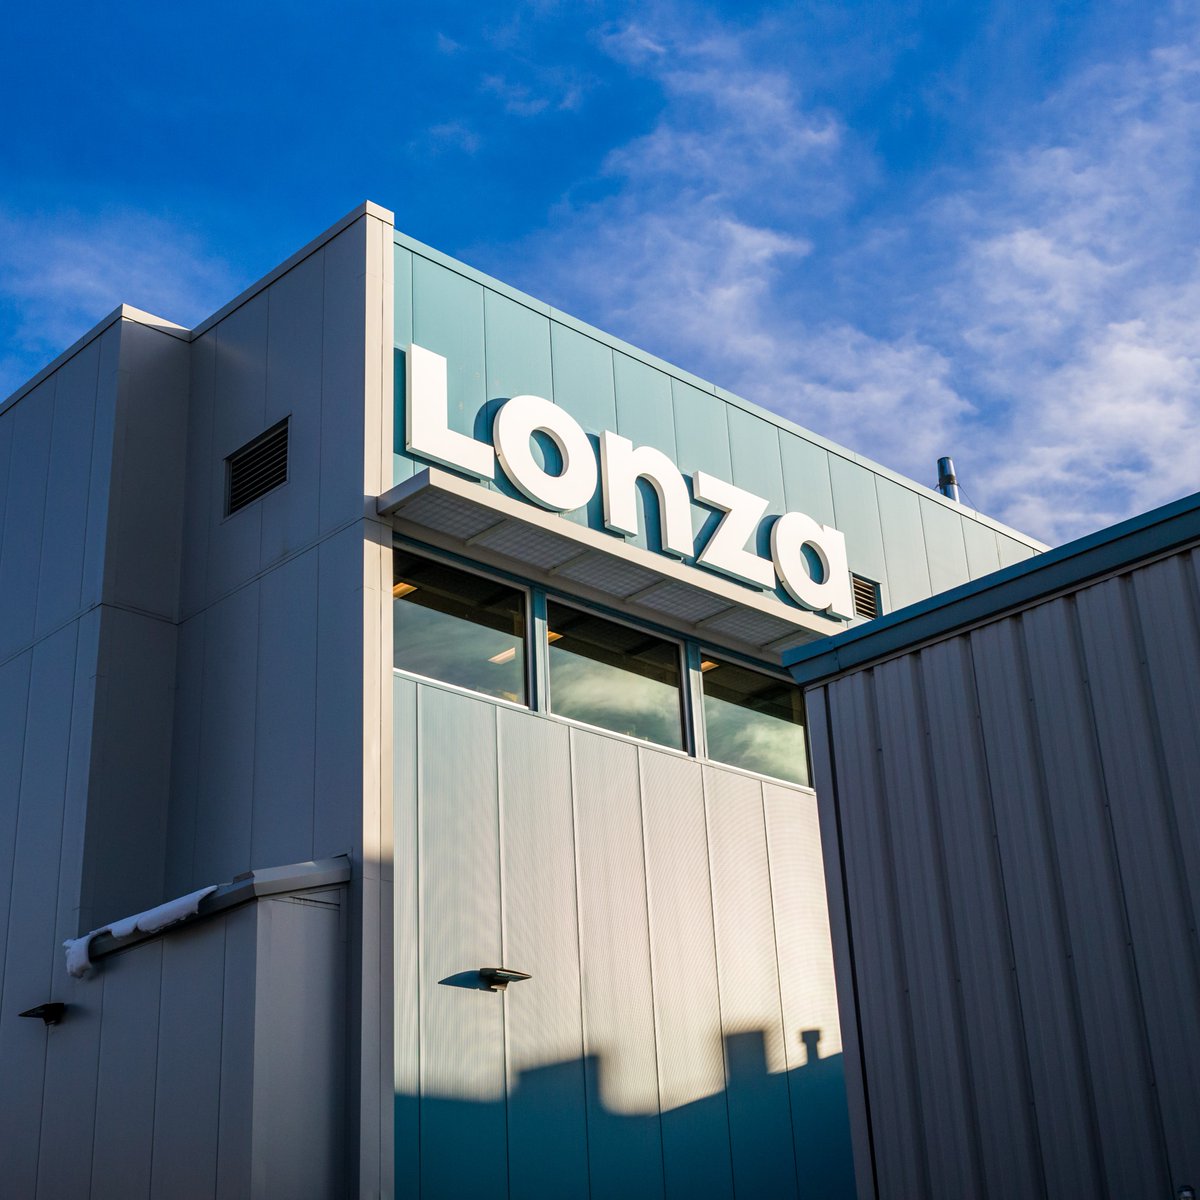 We have expanded our service offering for spray-drying of proteins for pulmonary delivery. The new offering provides clinical and commercial manufacturing services from Lonza’s Bend (US) site, home to Lonza’s Center of Excellence for respiratory delivery. bit.ly/3xaNWoW